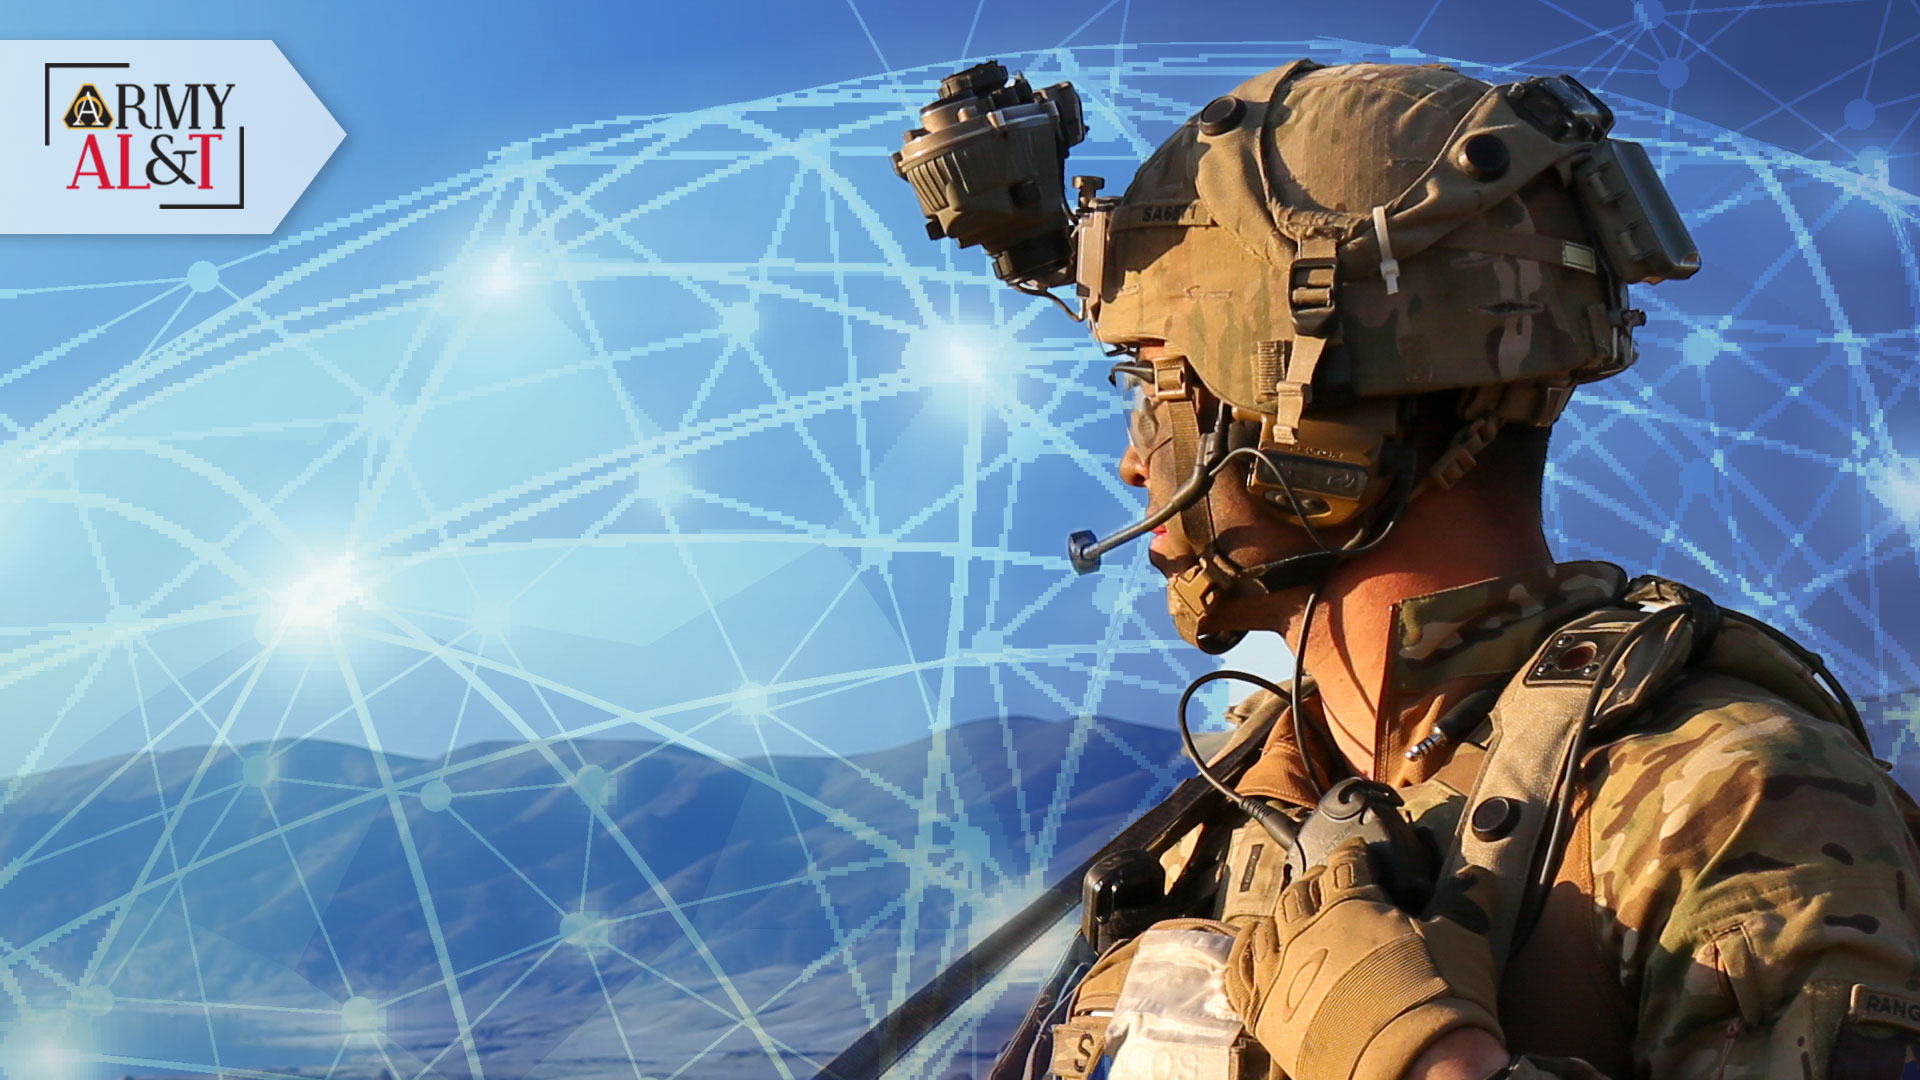 The need for interoperability standards Army AL&T